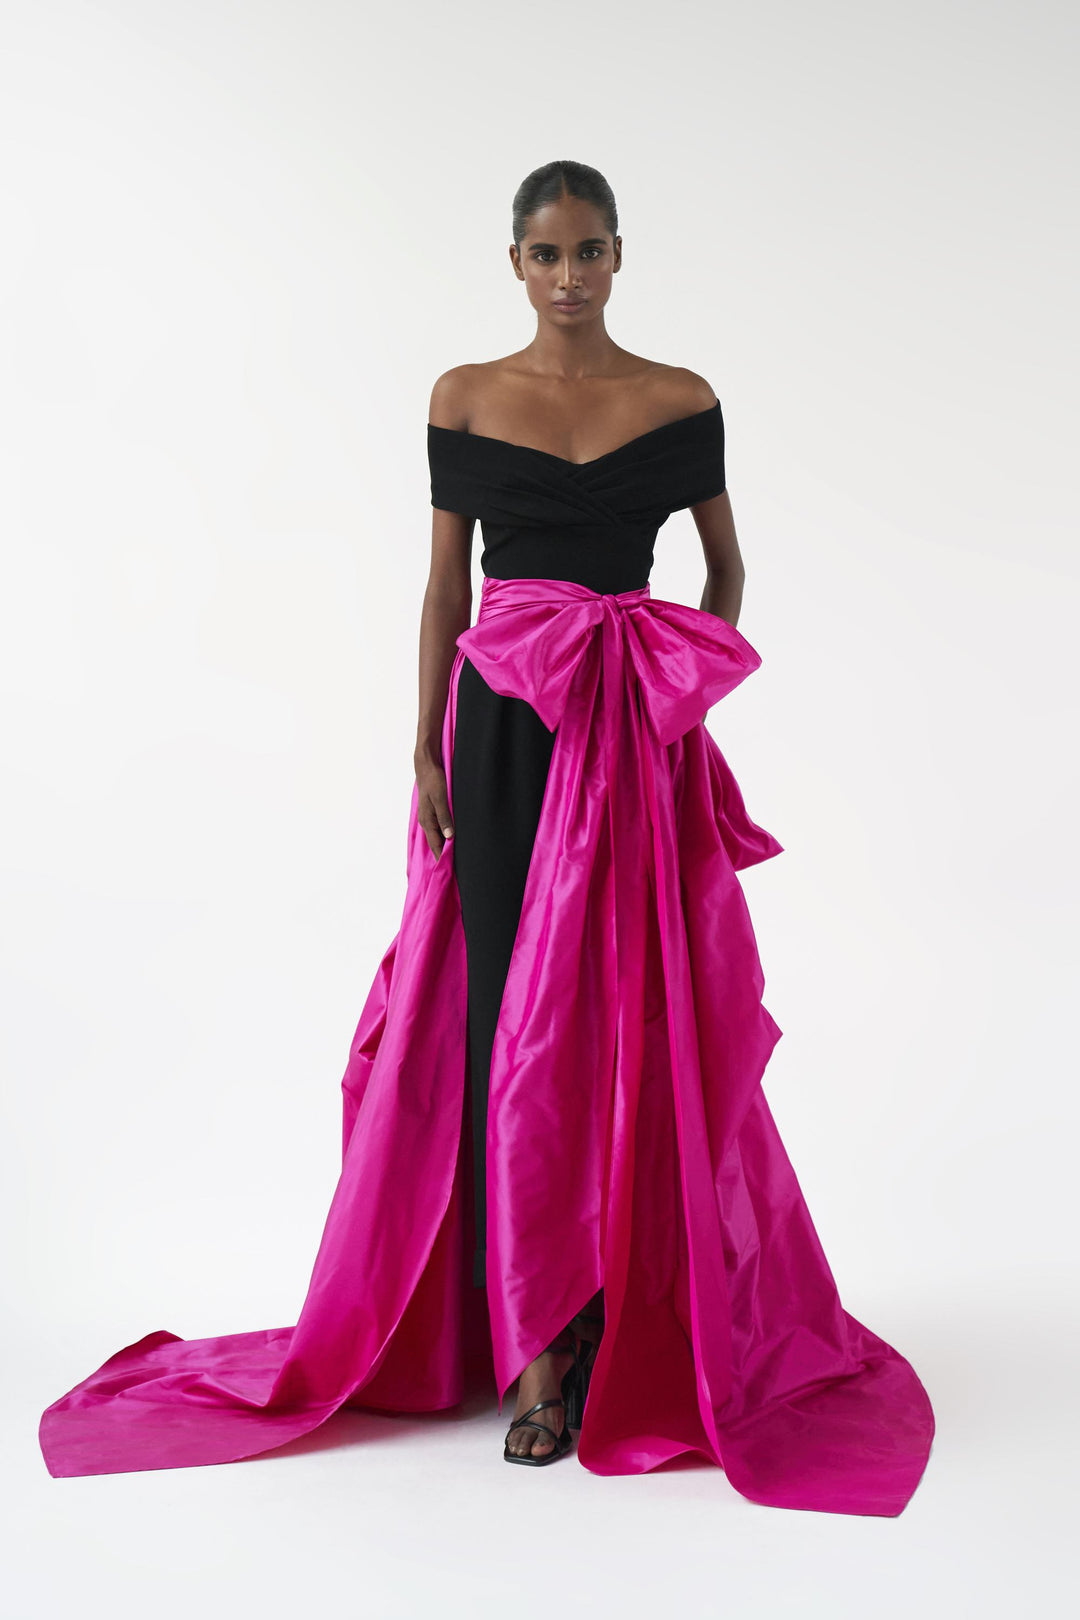 Belted taffeta overskirt with picked up hem